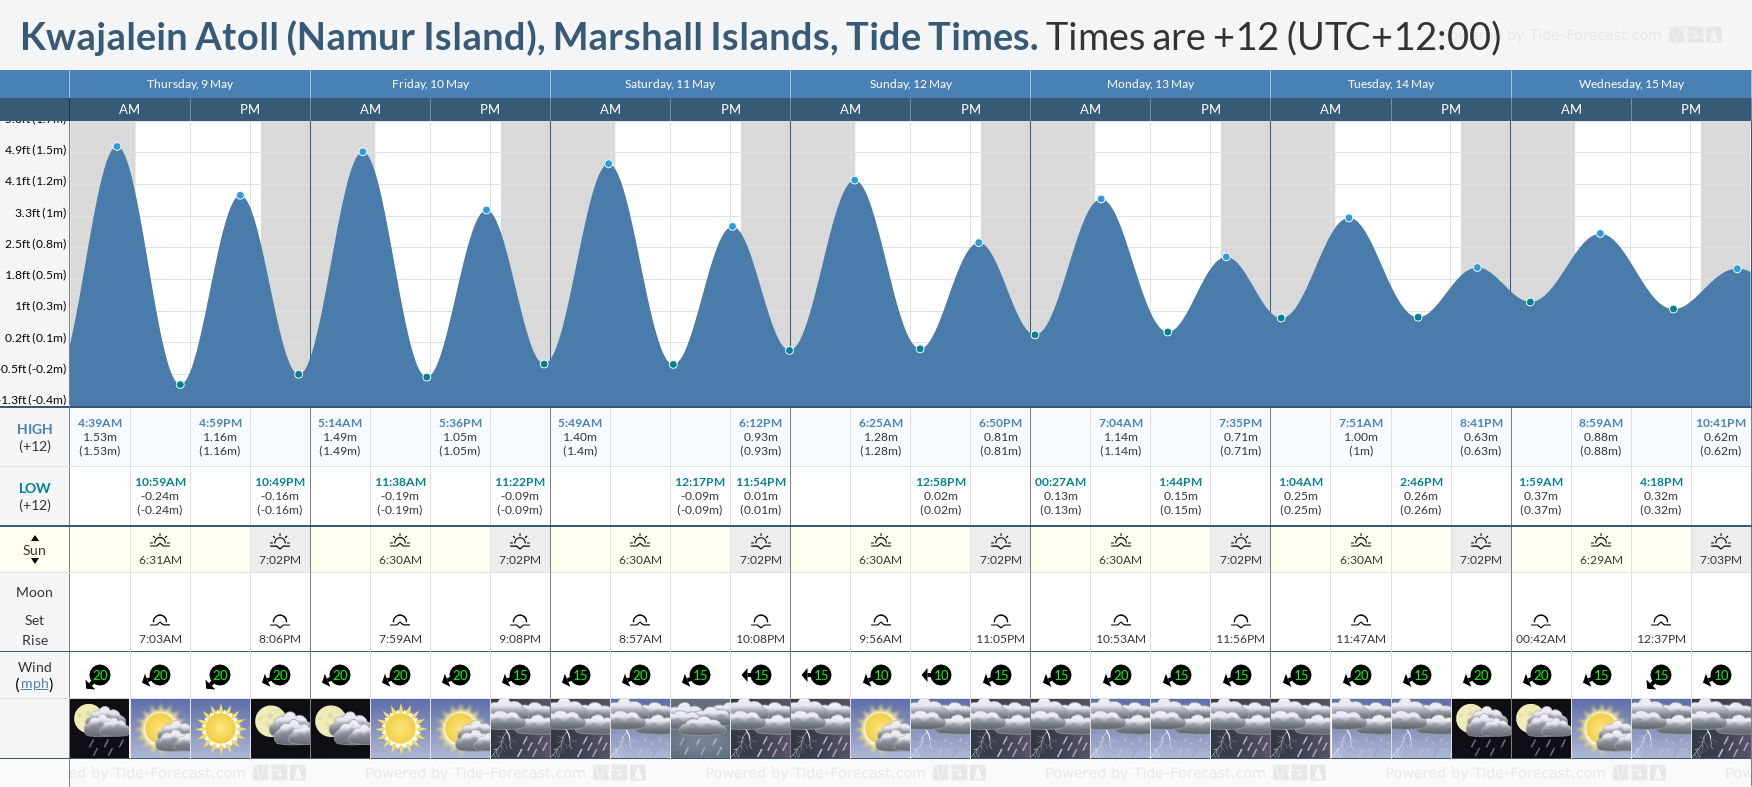 Kwajalein Atoll (Namur Island), Marshall Islands Tide Chart including high and low tide tide times for the next 7 days